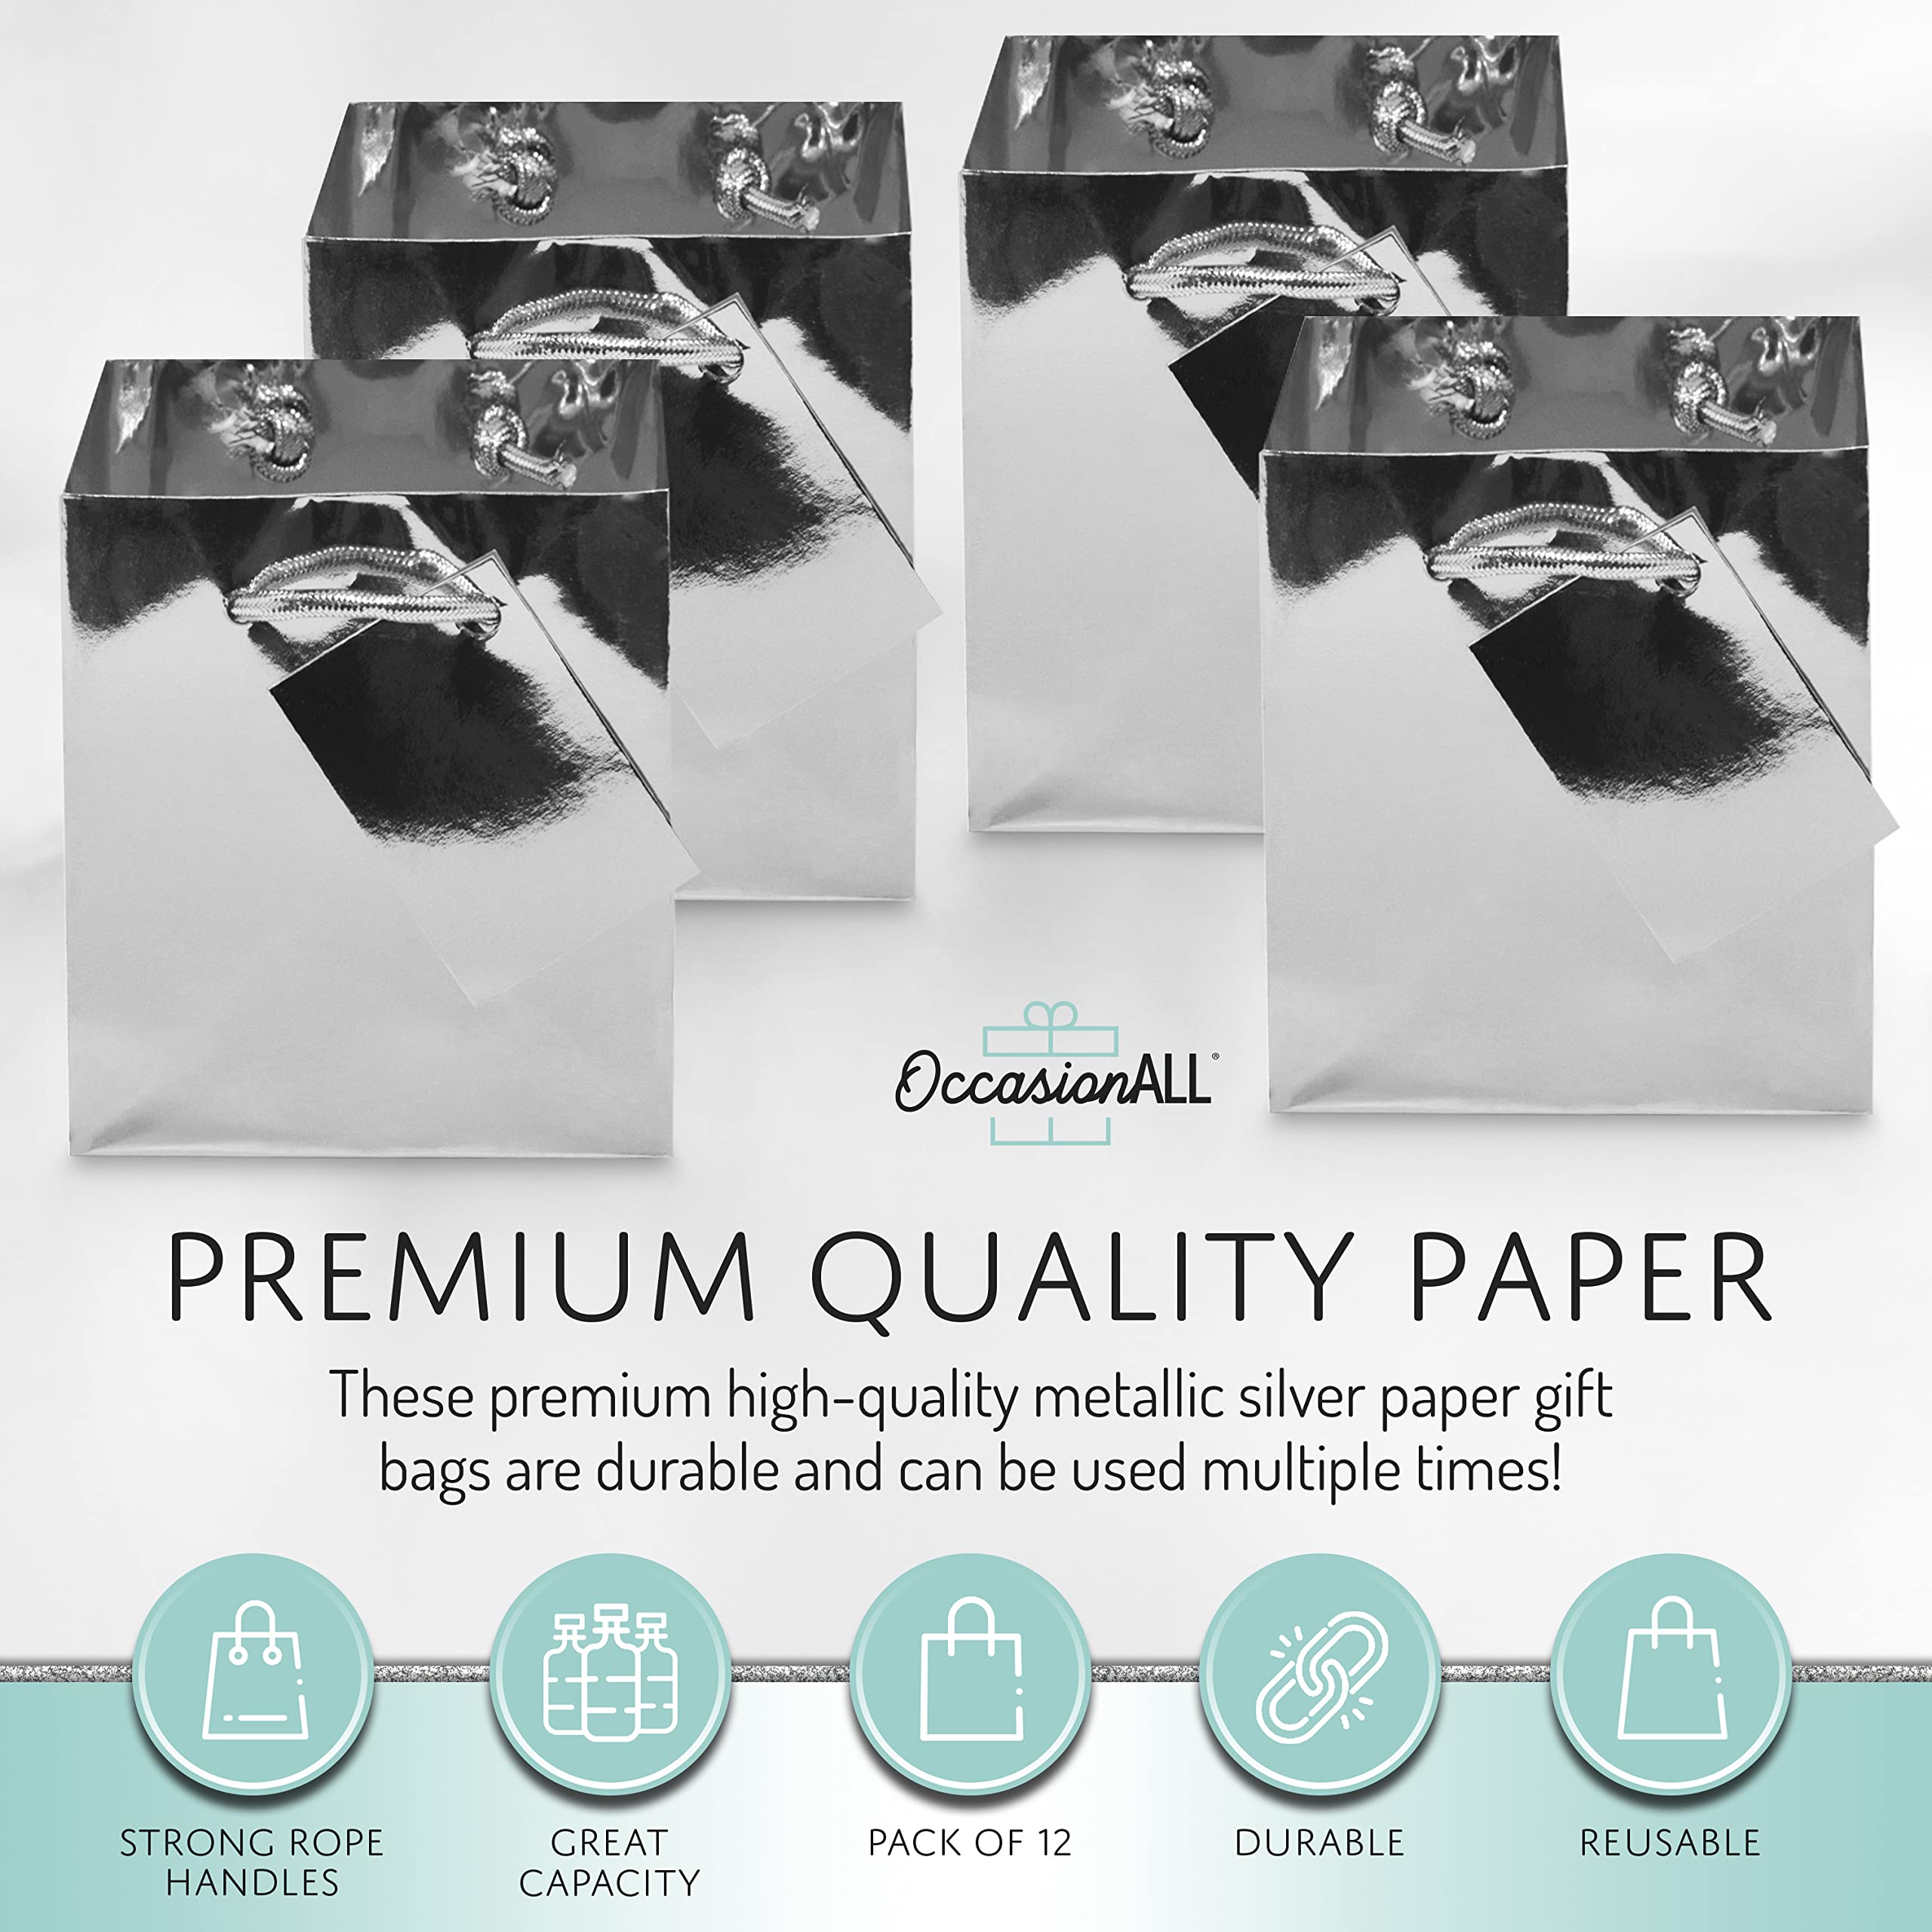 4x2.75x4.5" 12 Pcs. Small Metallic Silver Paper Gift Bags with Metallic Handles, Party Favor Bags for Birthday Parties, Weddings Gifts  - Acceptable